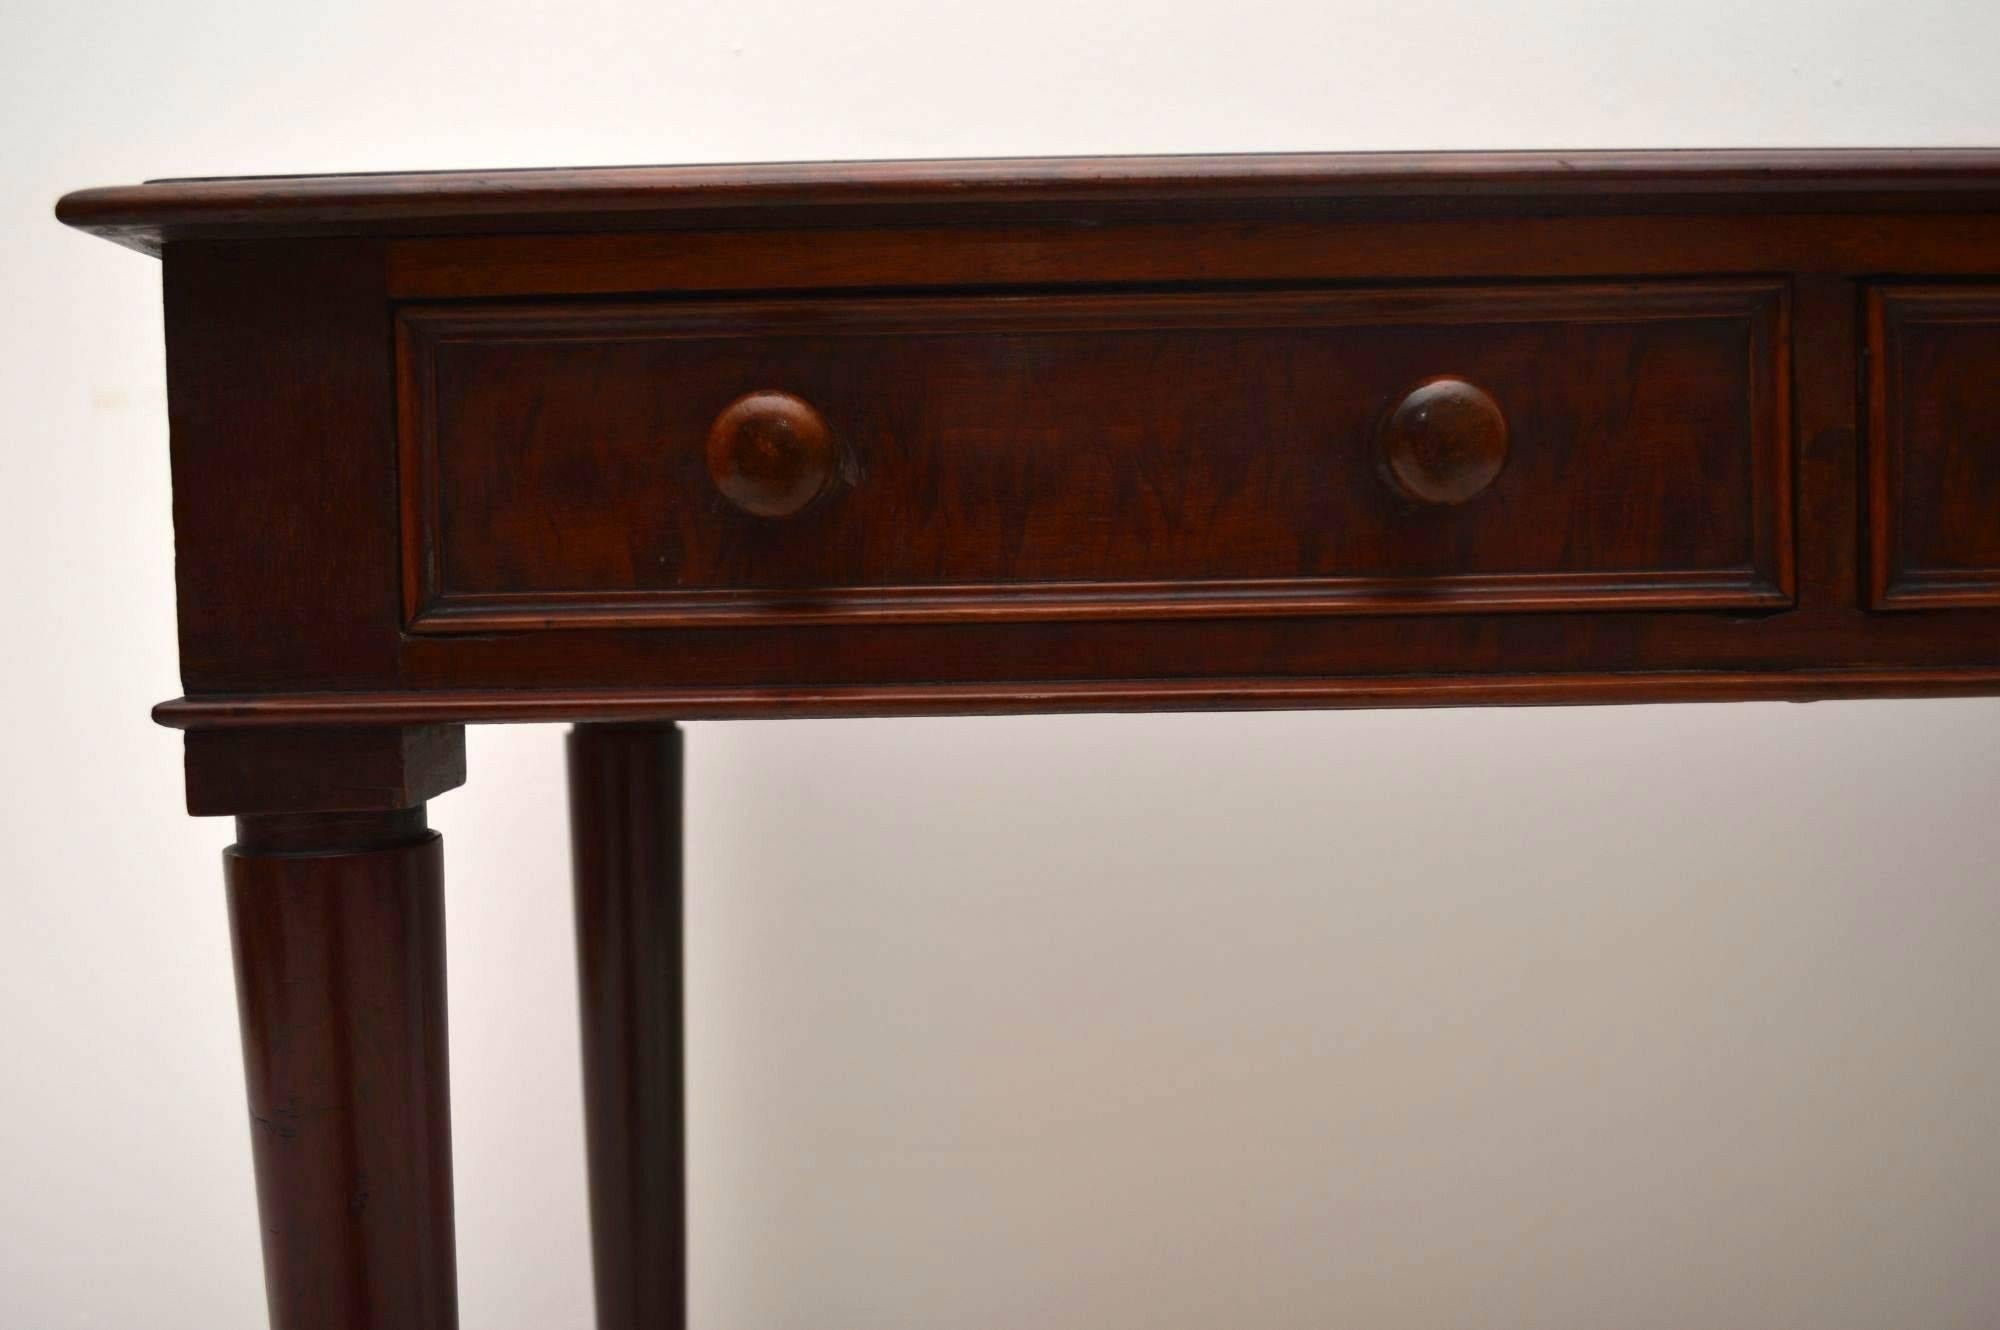 Mid-19th Century Antique Victorian Mahogany Leather Top Writing Table Desk